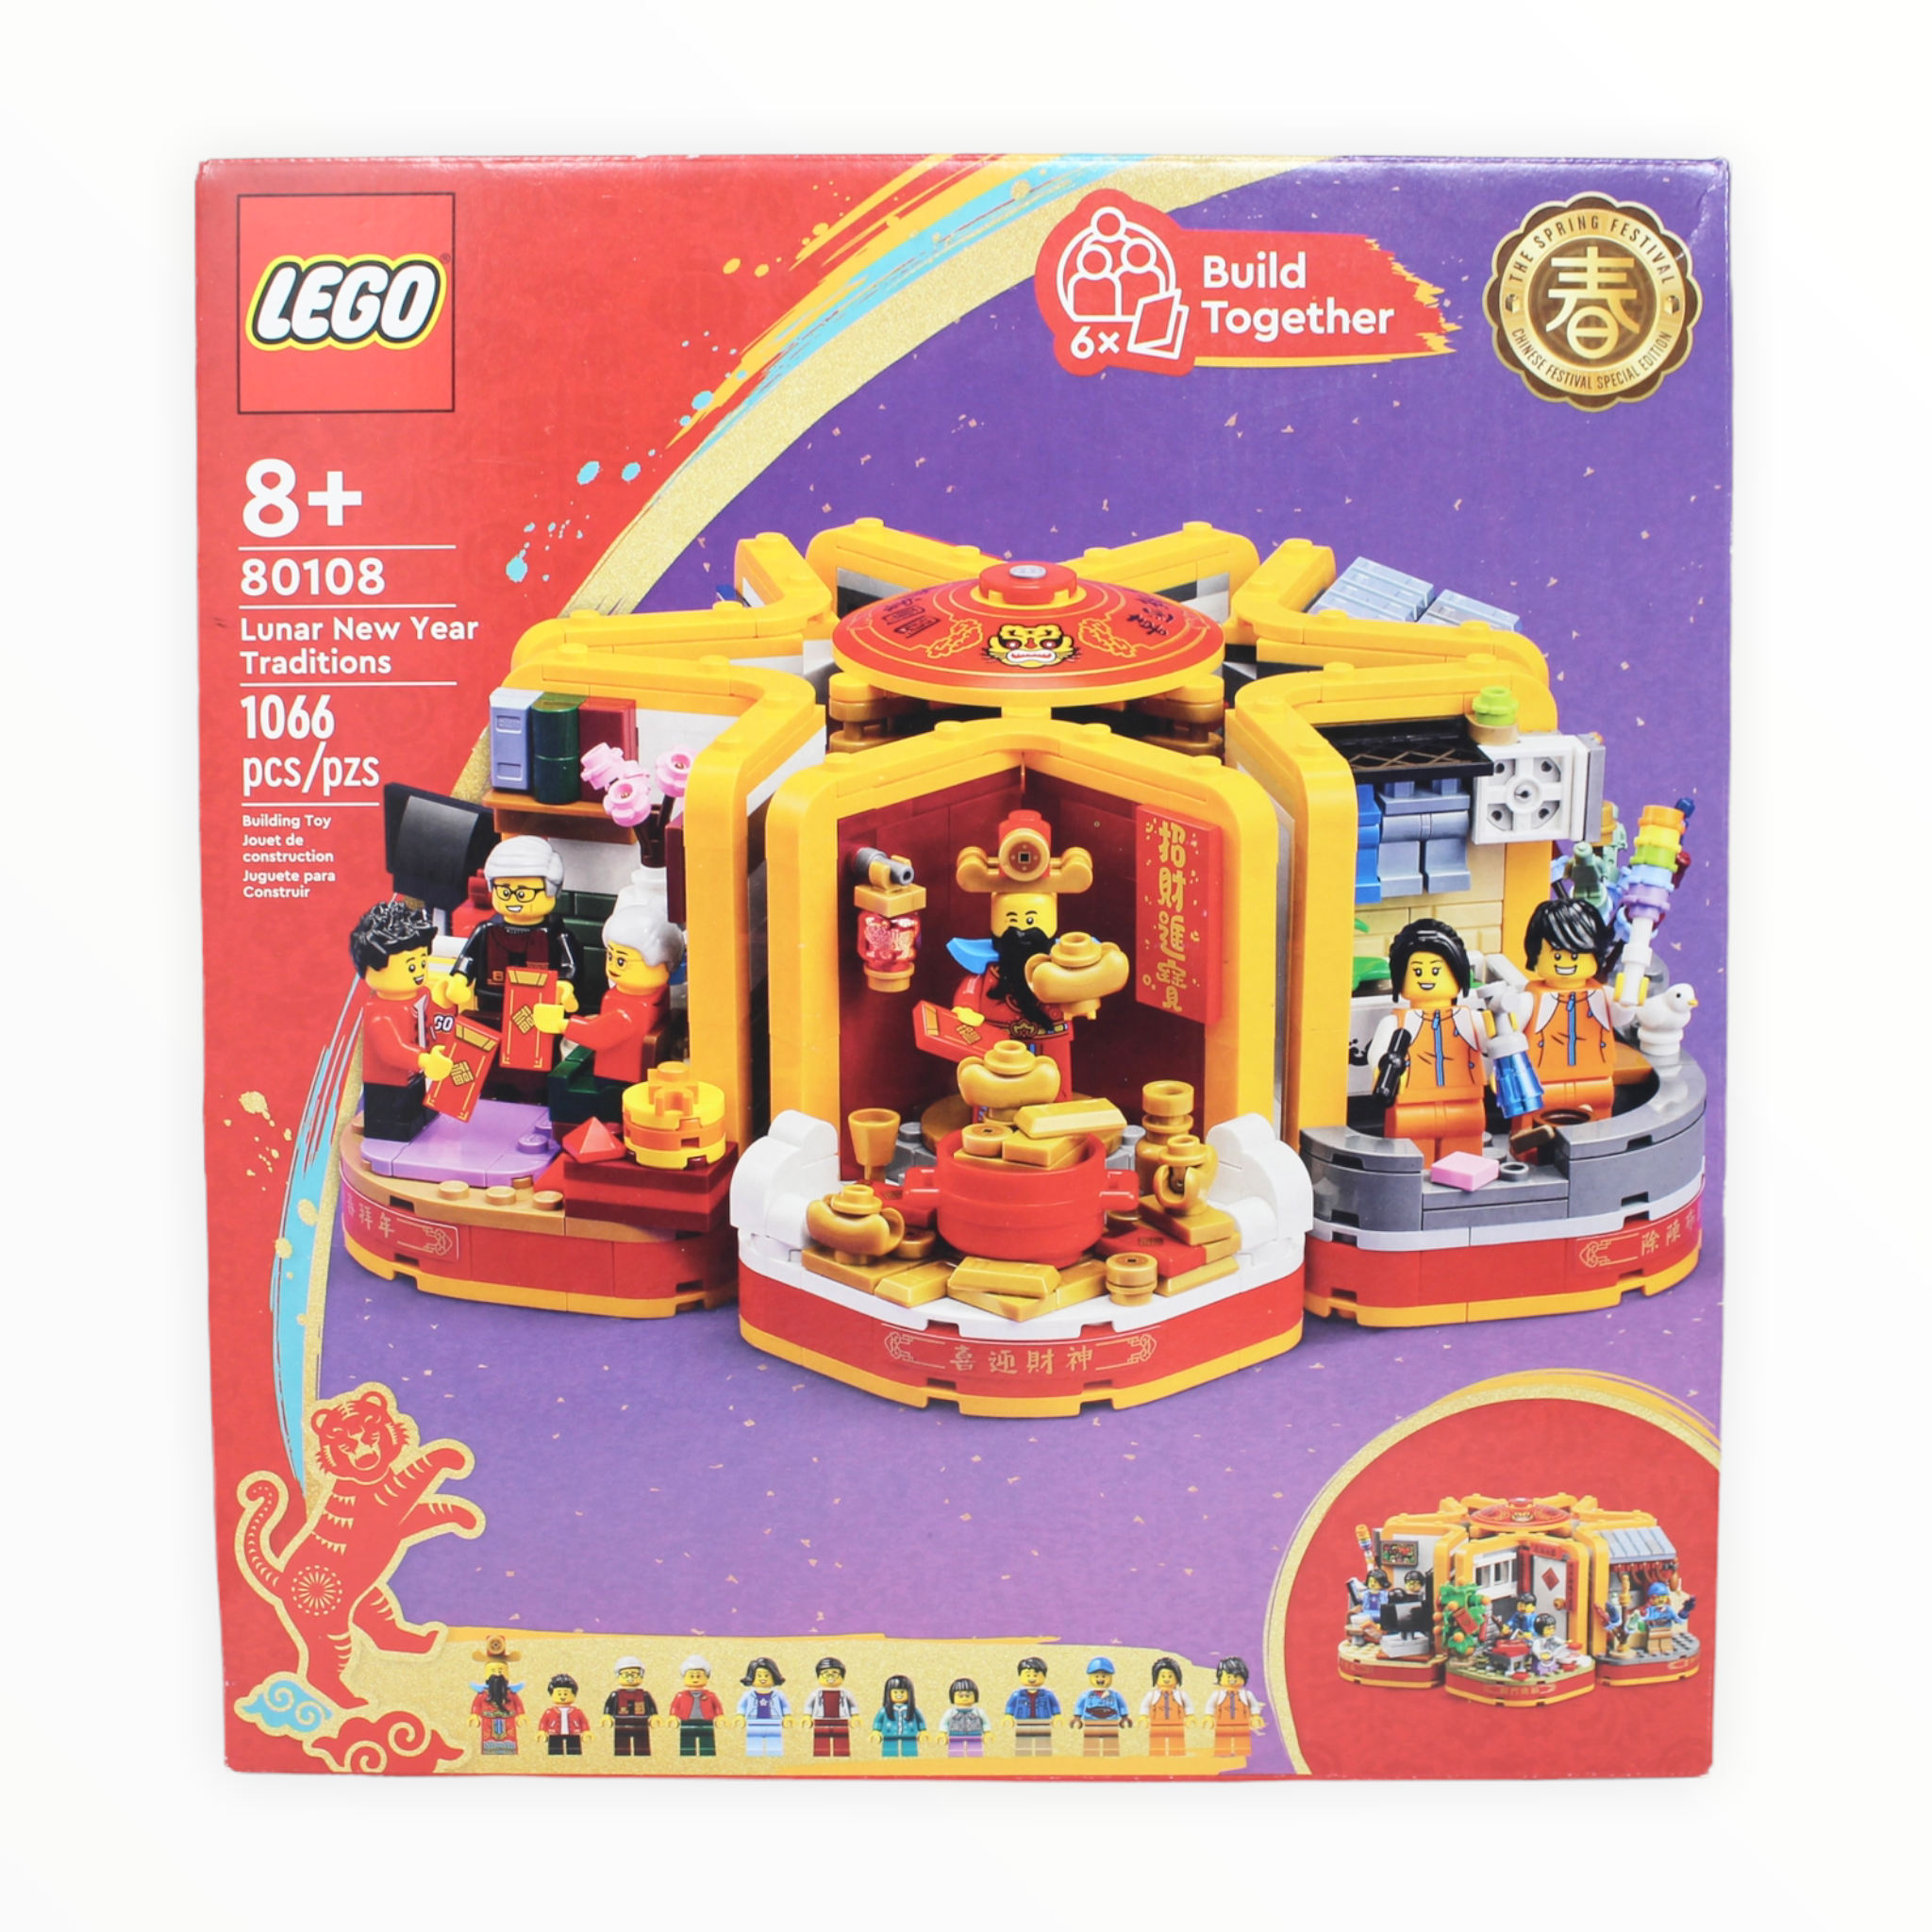 Certified Used Set 80108 LEGO Lunar New Year Traditions